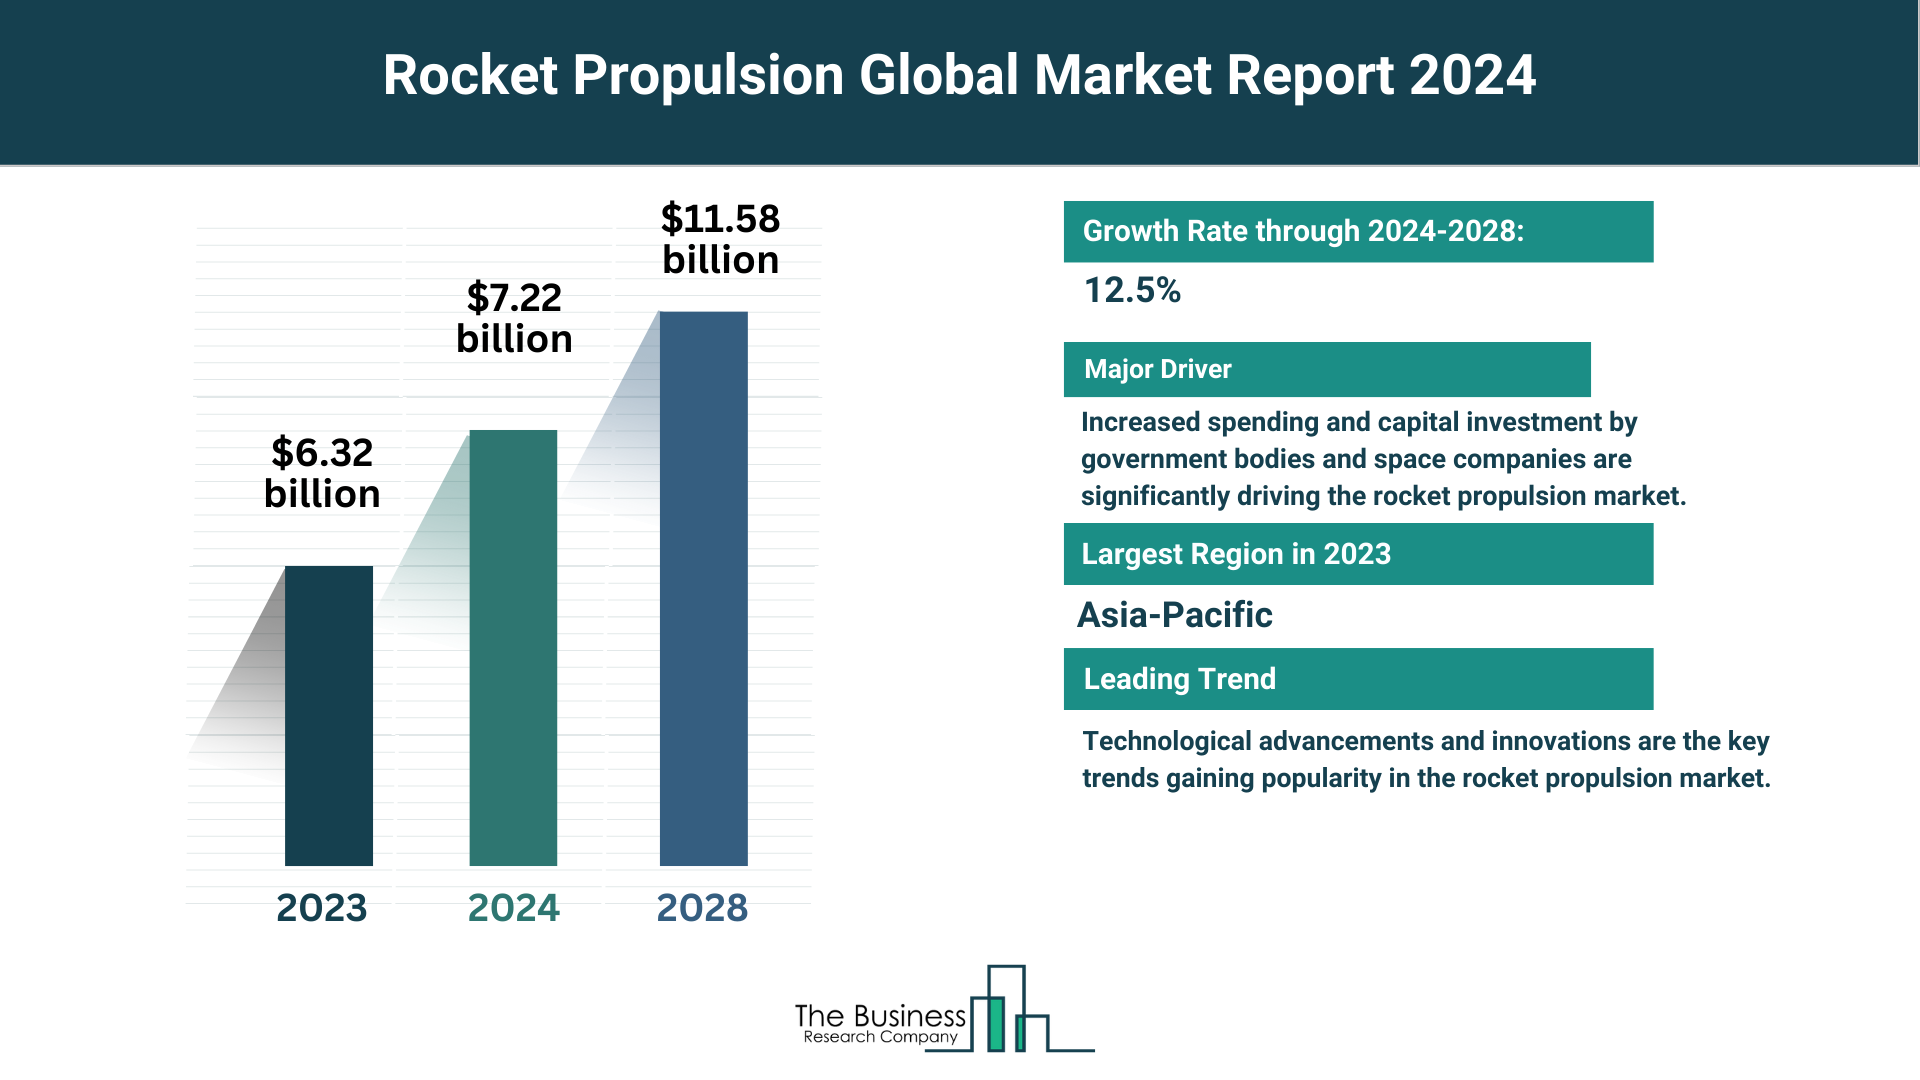 What Are The 5 Top Insights From The Rocket Propulsion Market Forecast 2024